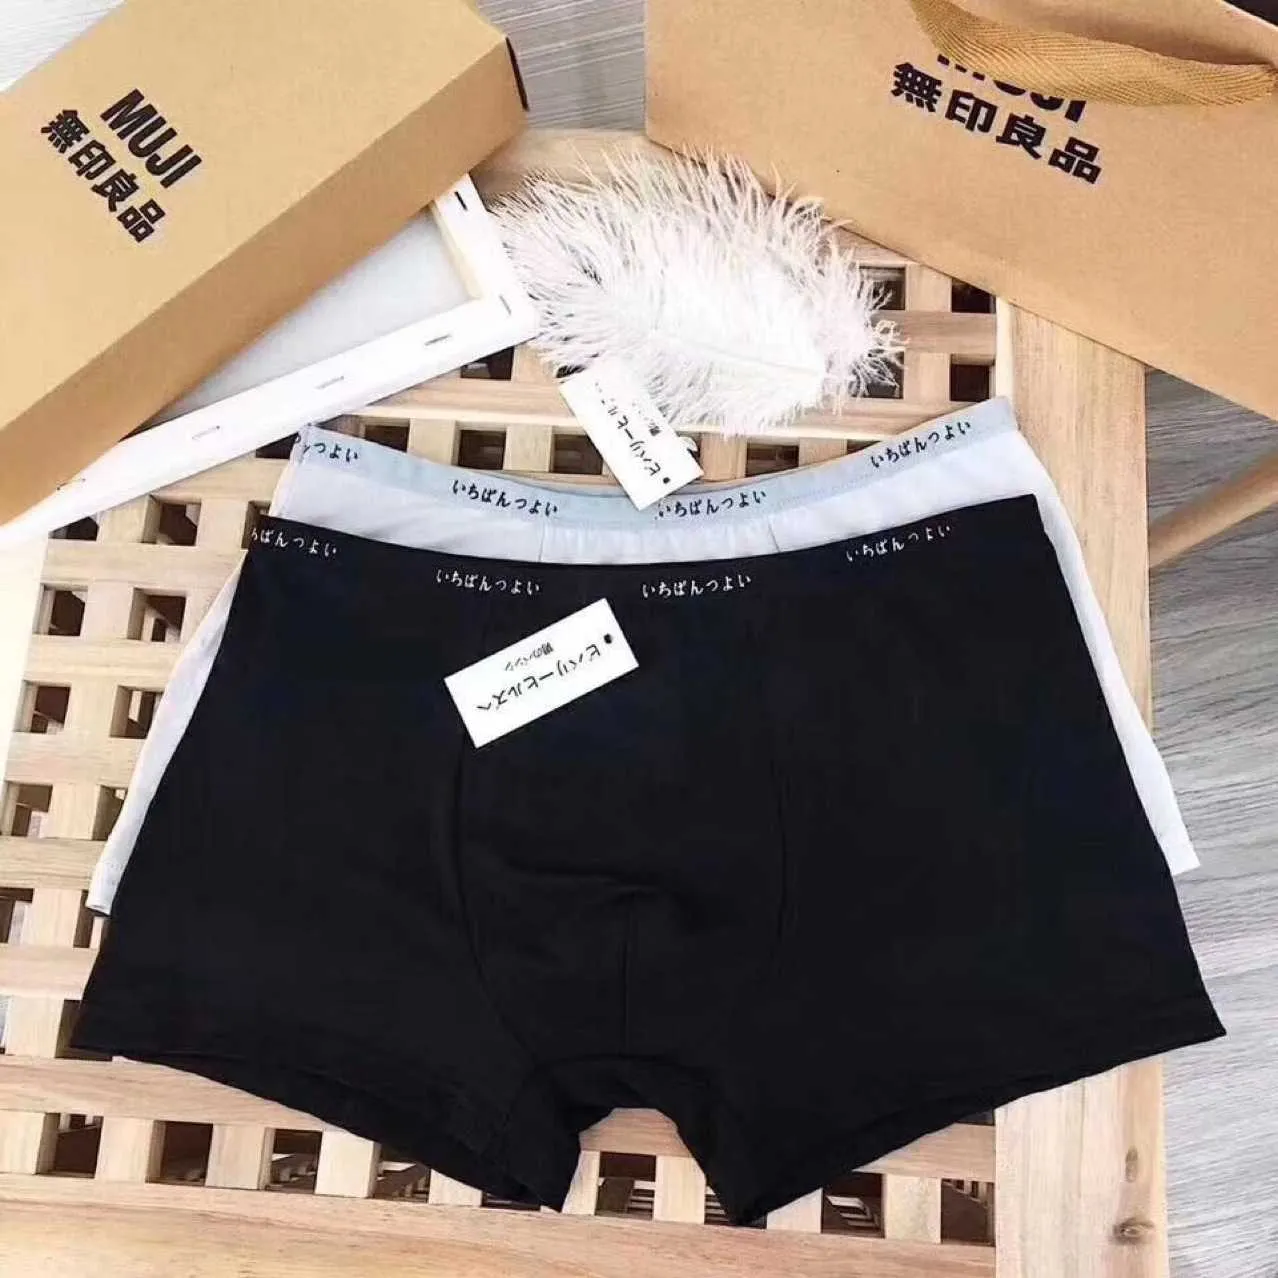 Japanese Muji Mens Boxer Shorts Modal Breathable Underwear From  Yiweidhgate, $27.09